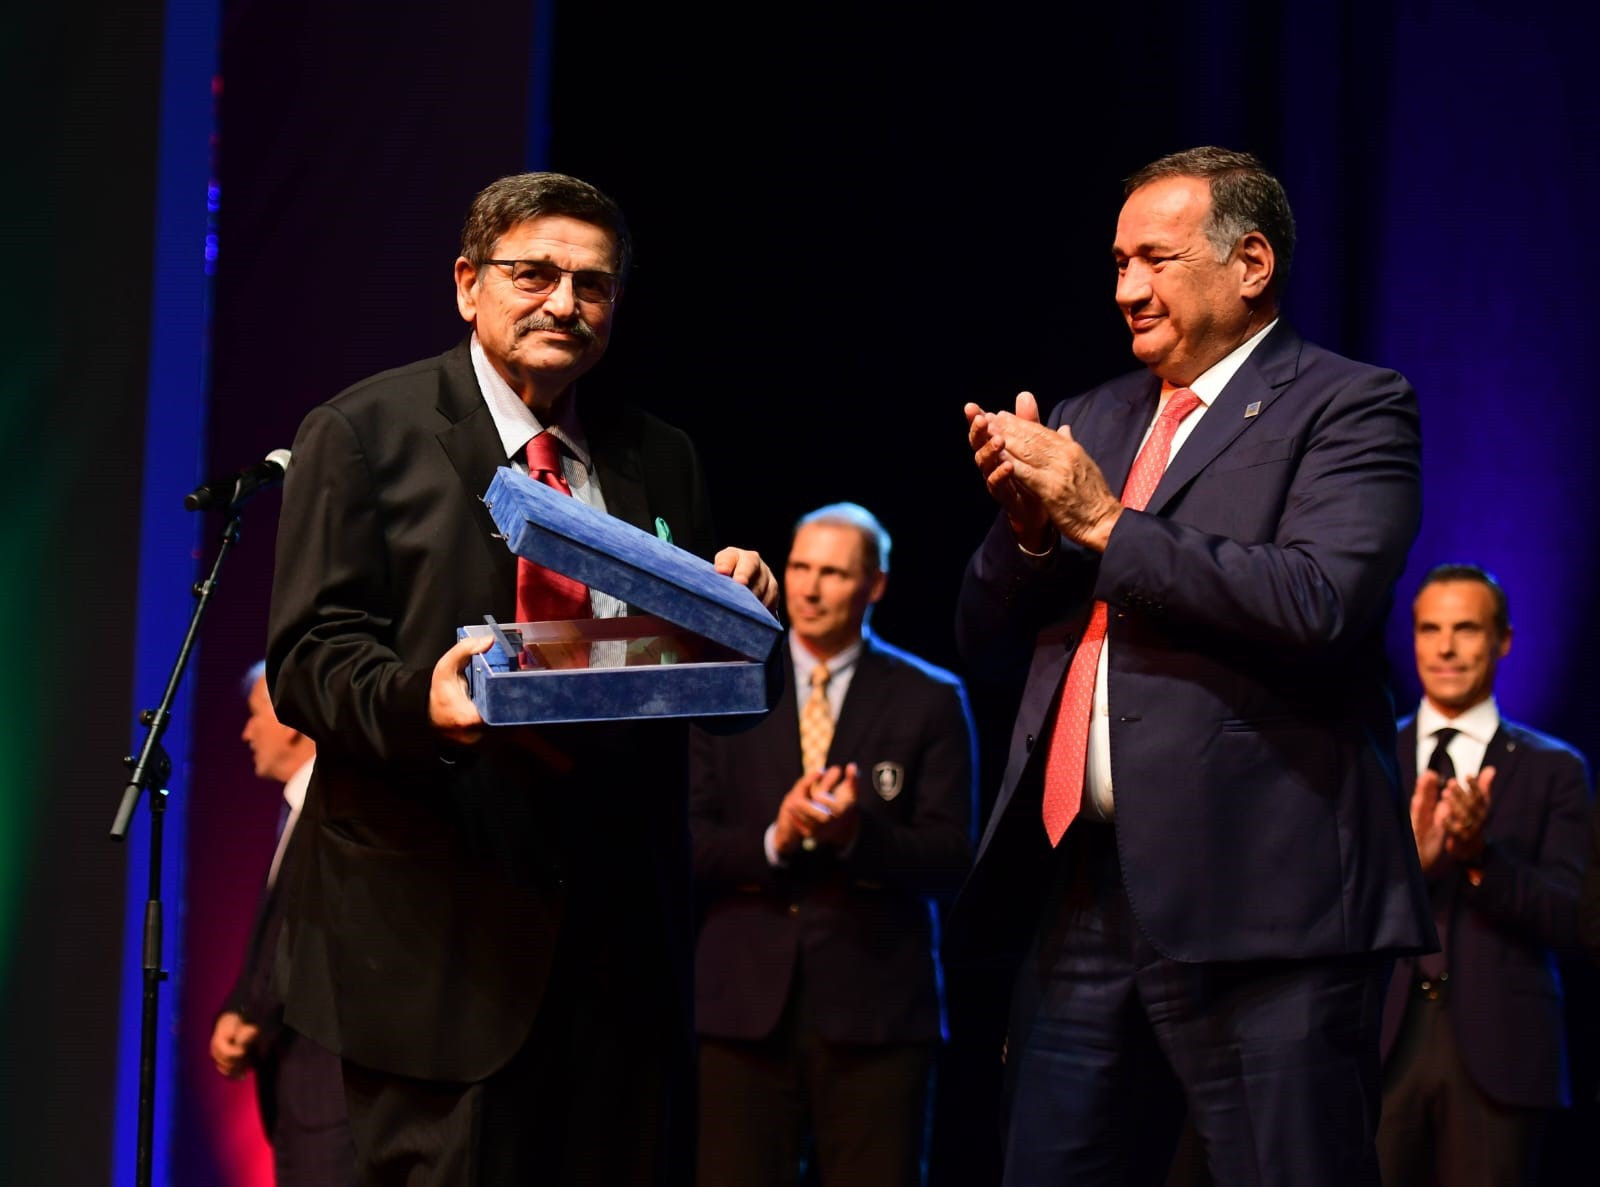 MOK President from 1992 until 2020 Vasil Tupurkovski, left, received a commemorative gift as part of the 30th anniversary celebrations ©EOC